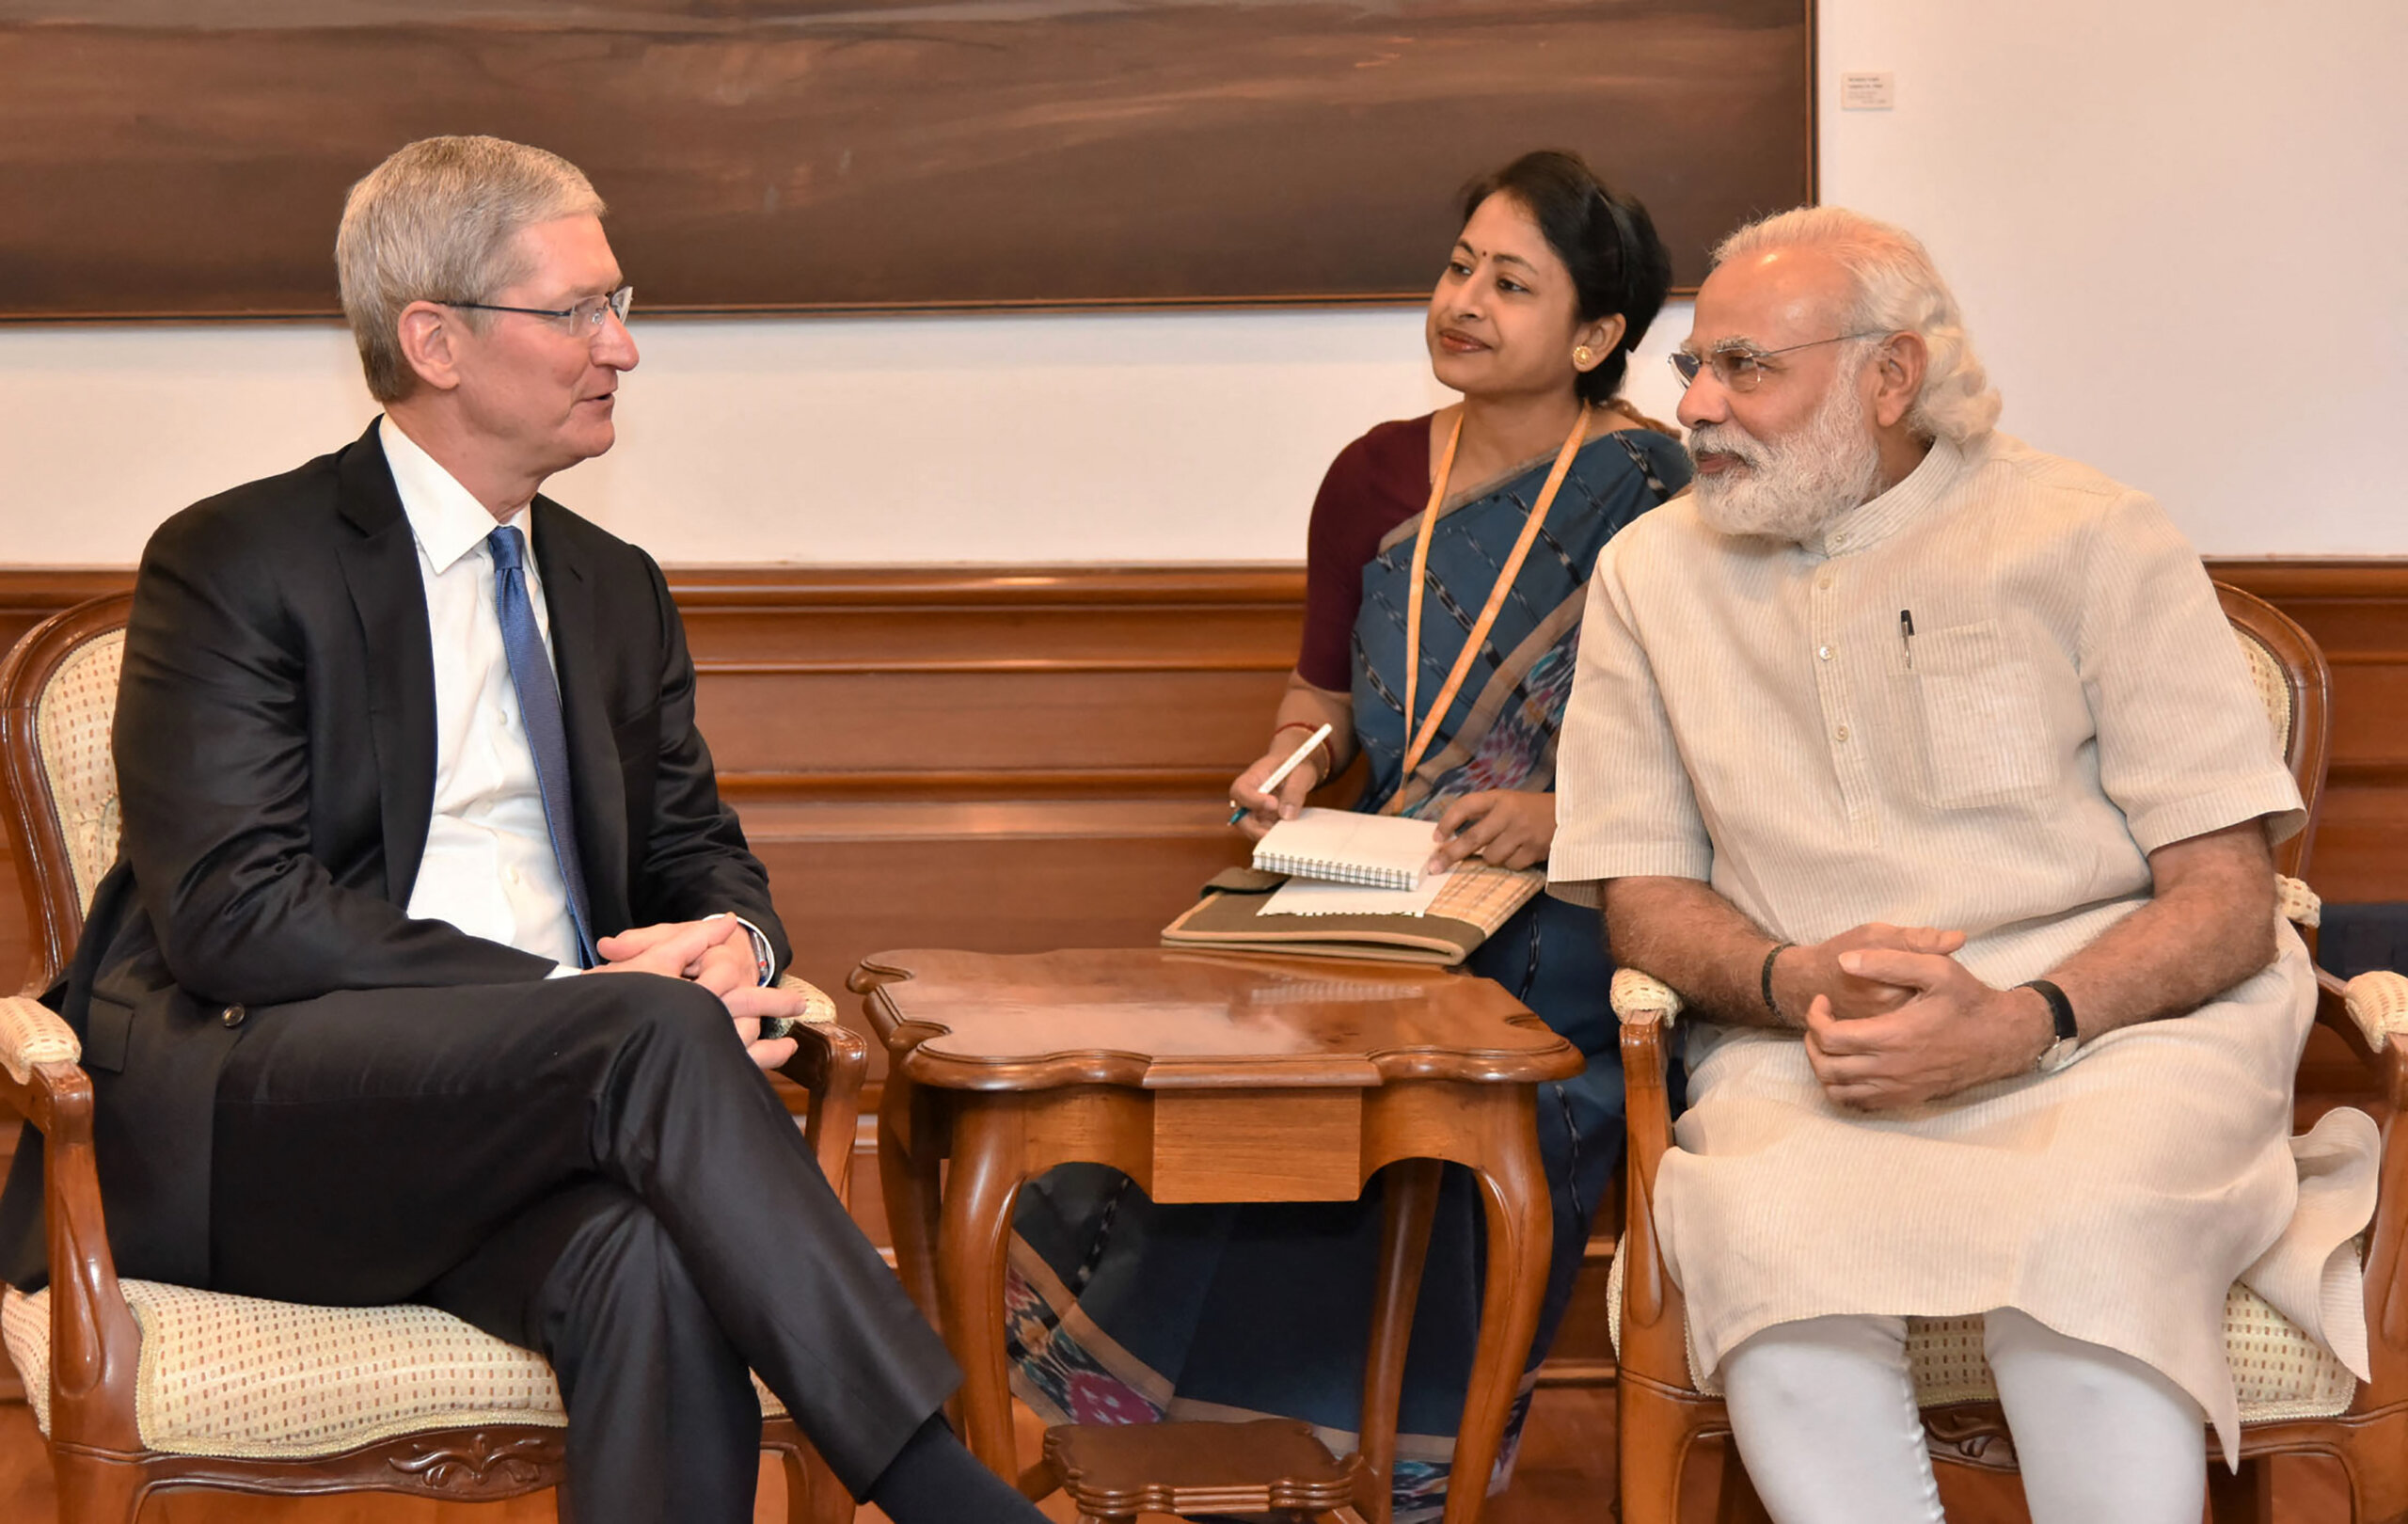 India is anticipated to produce 45-50% of Apple's iPhones by 2027